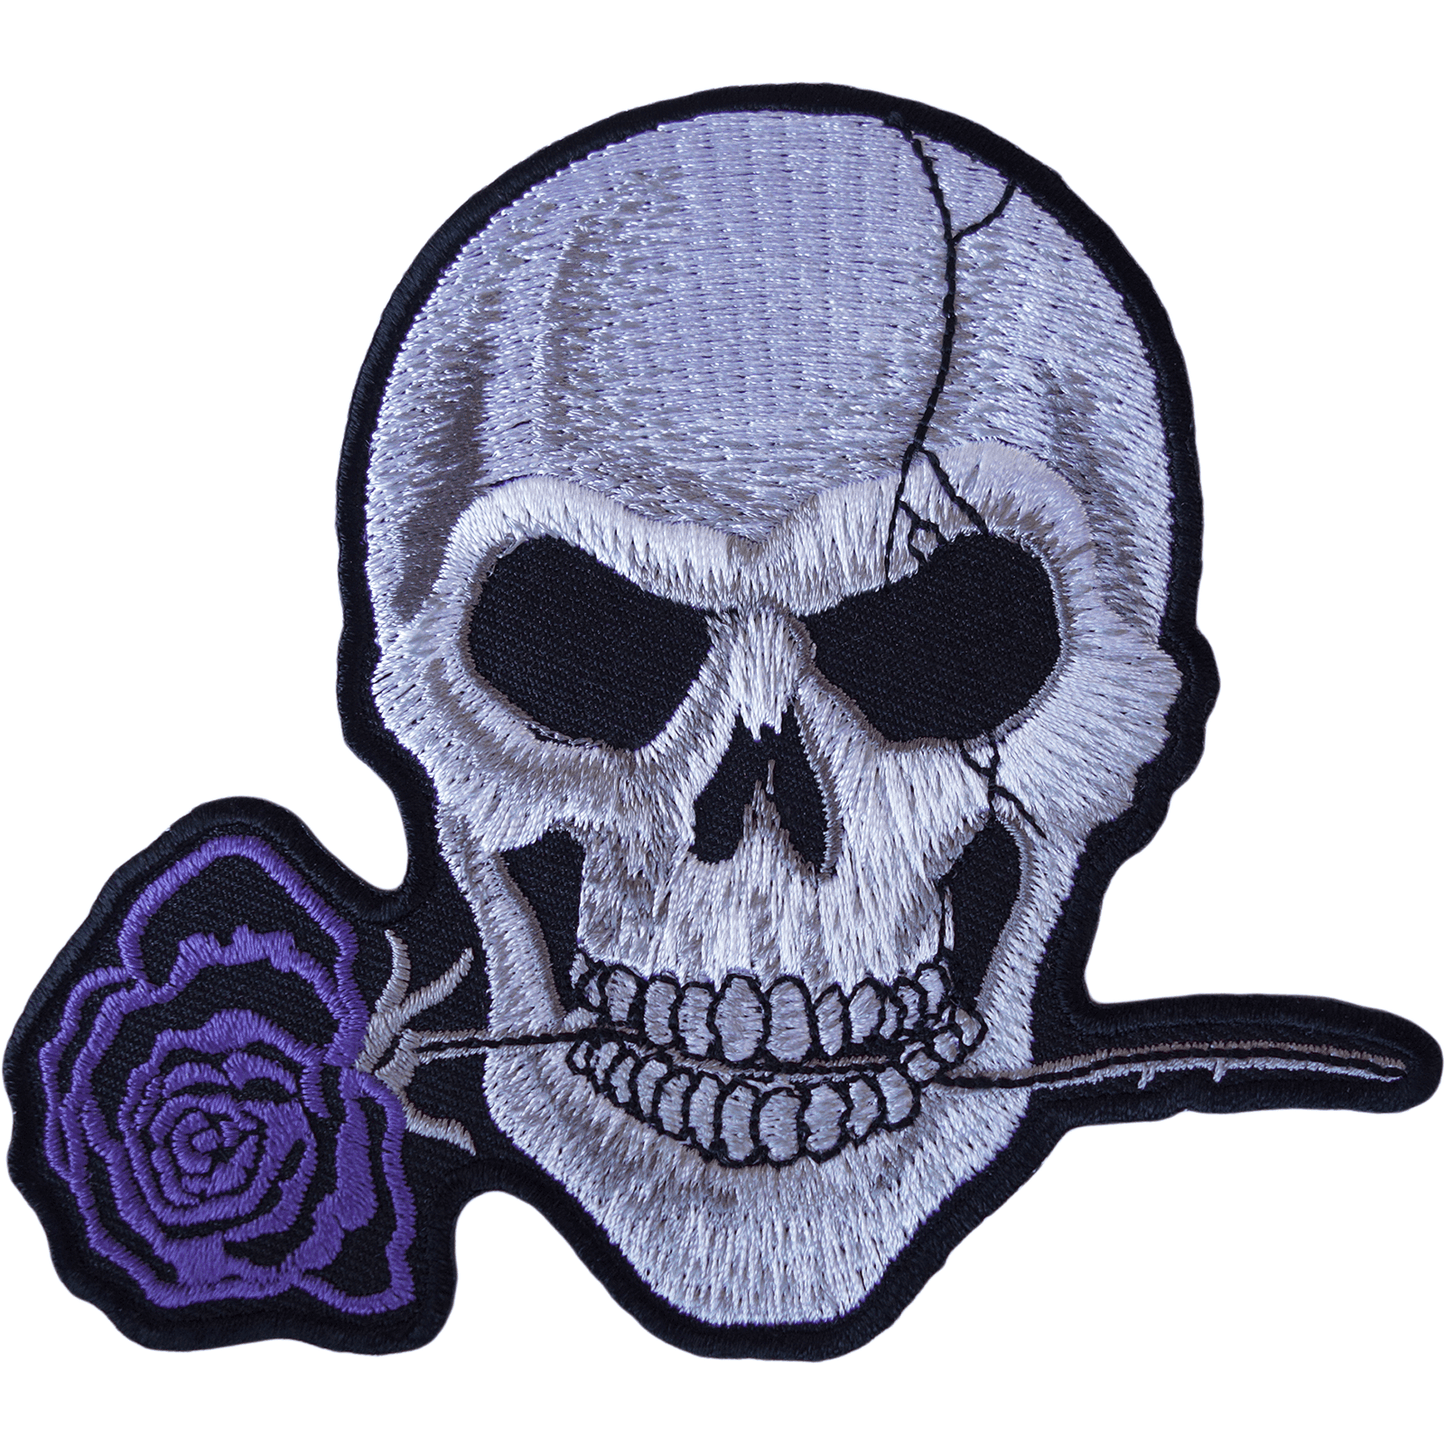 Skull Purple Rose Flower Patch Iron On Sew On Embroidered Badge Motorcycle Biker